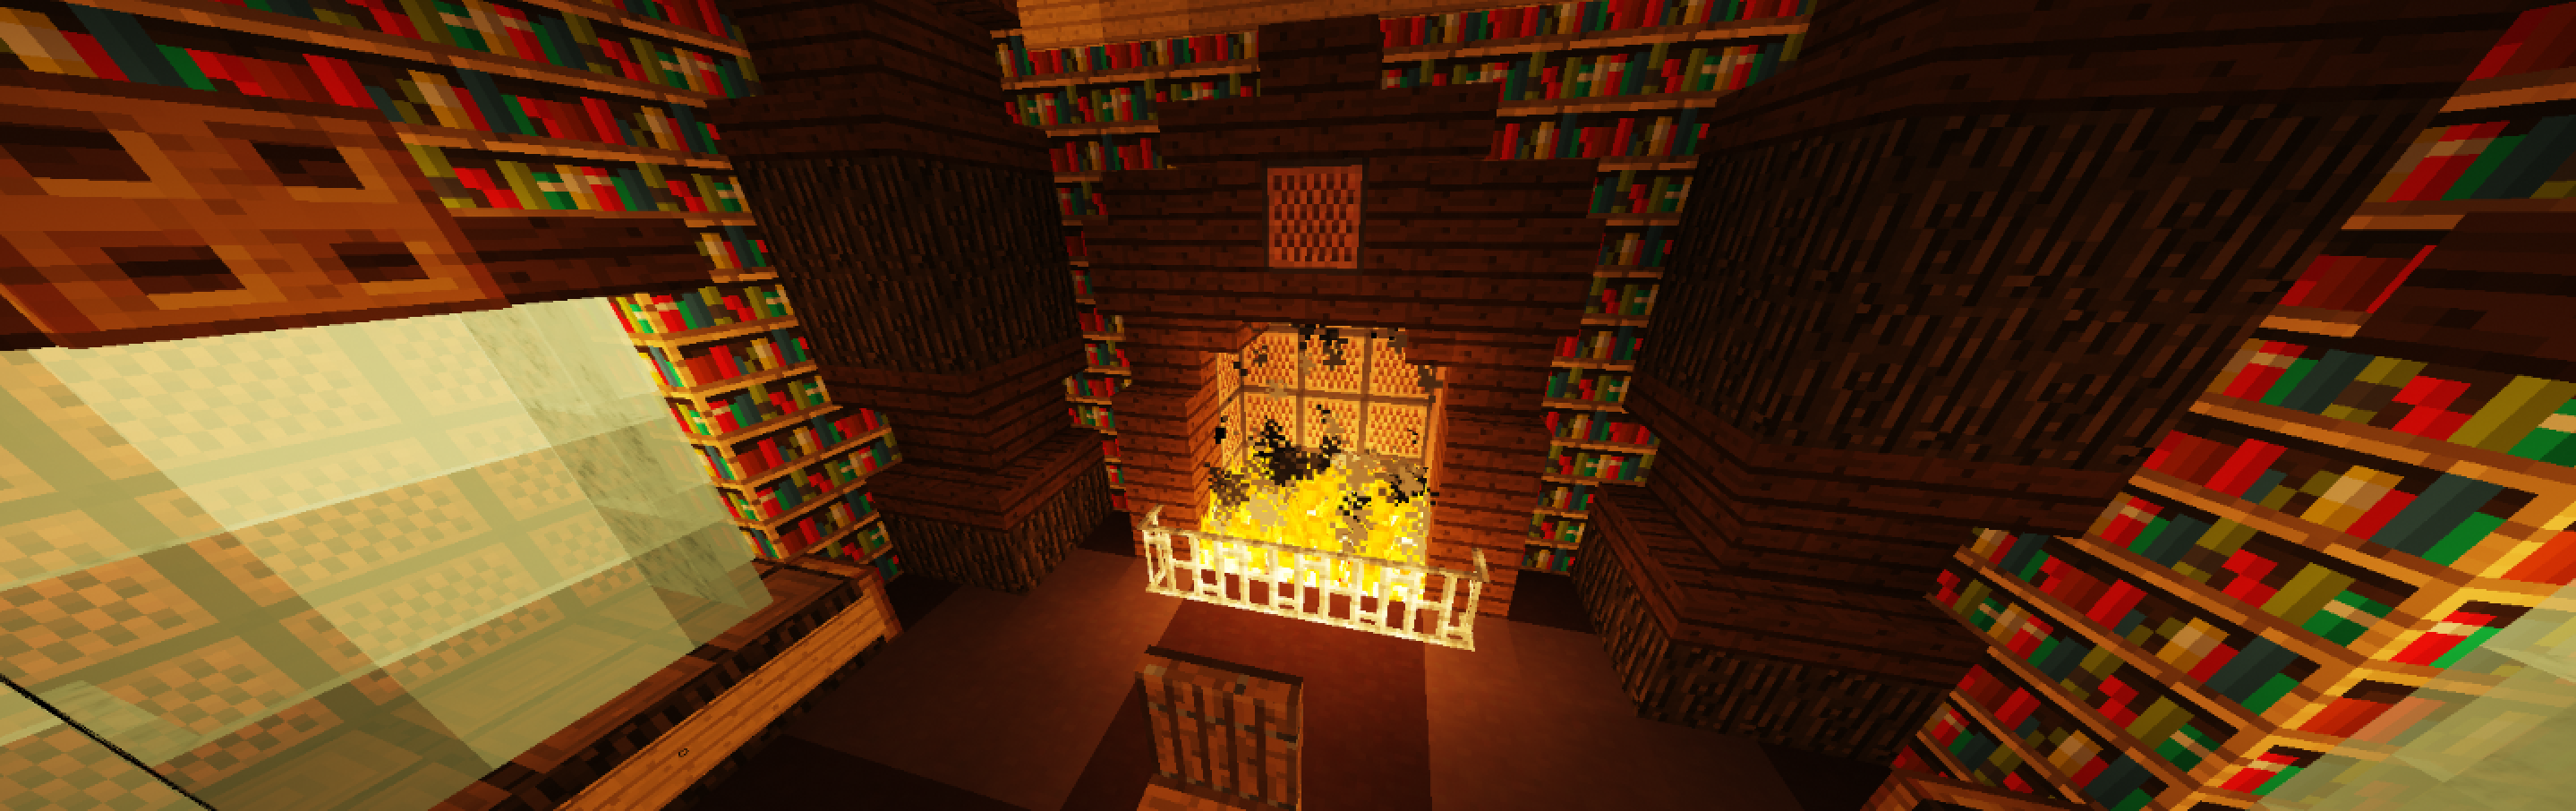 hub-library-fire.png